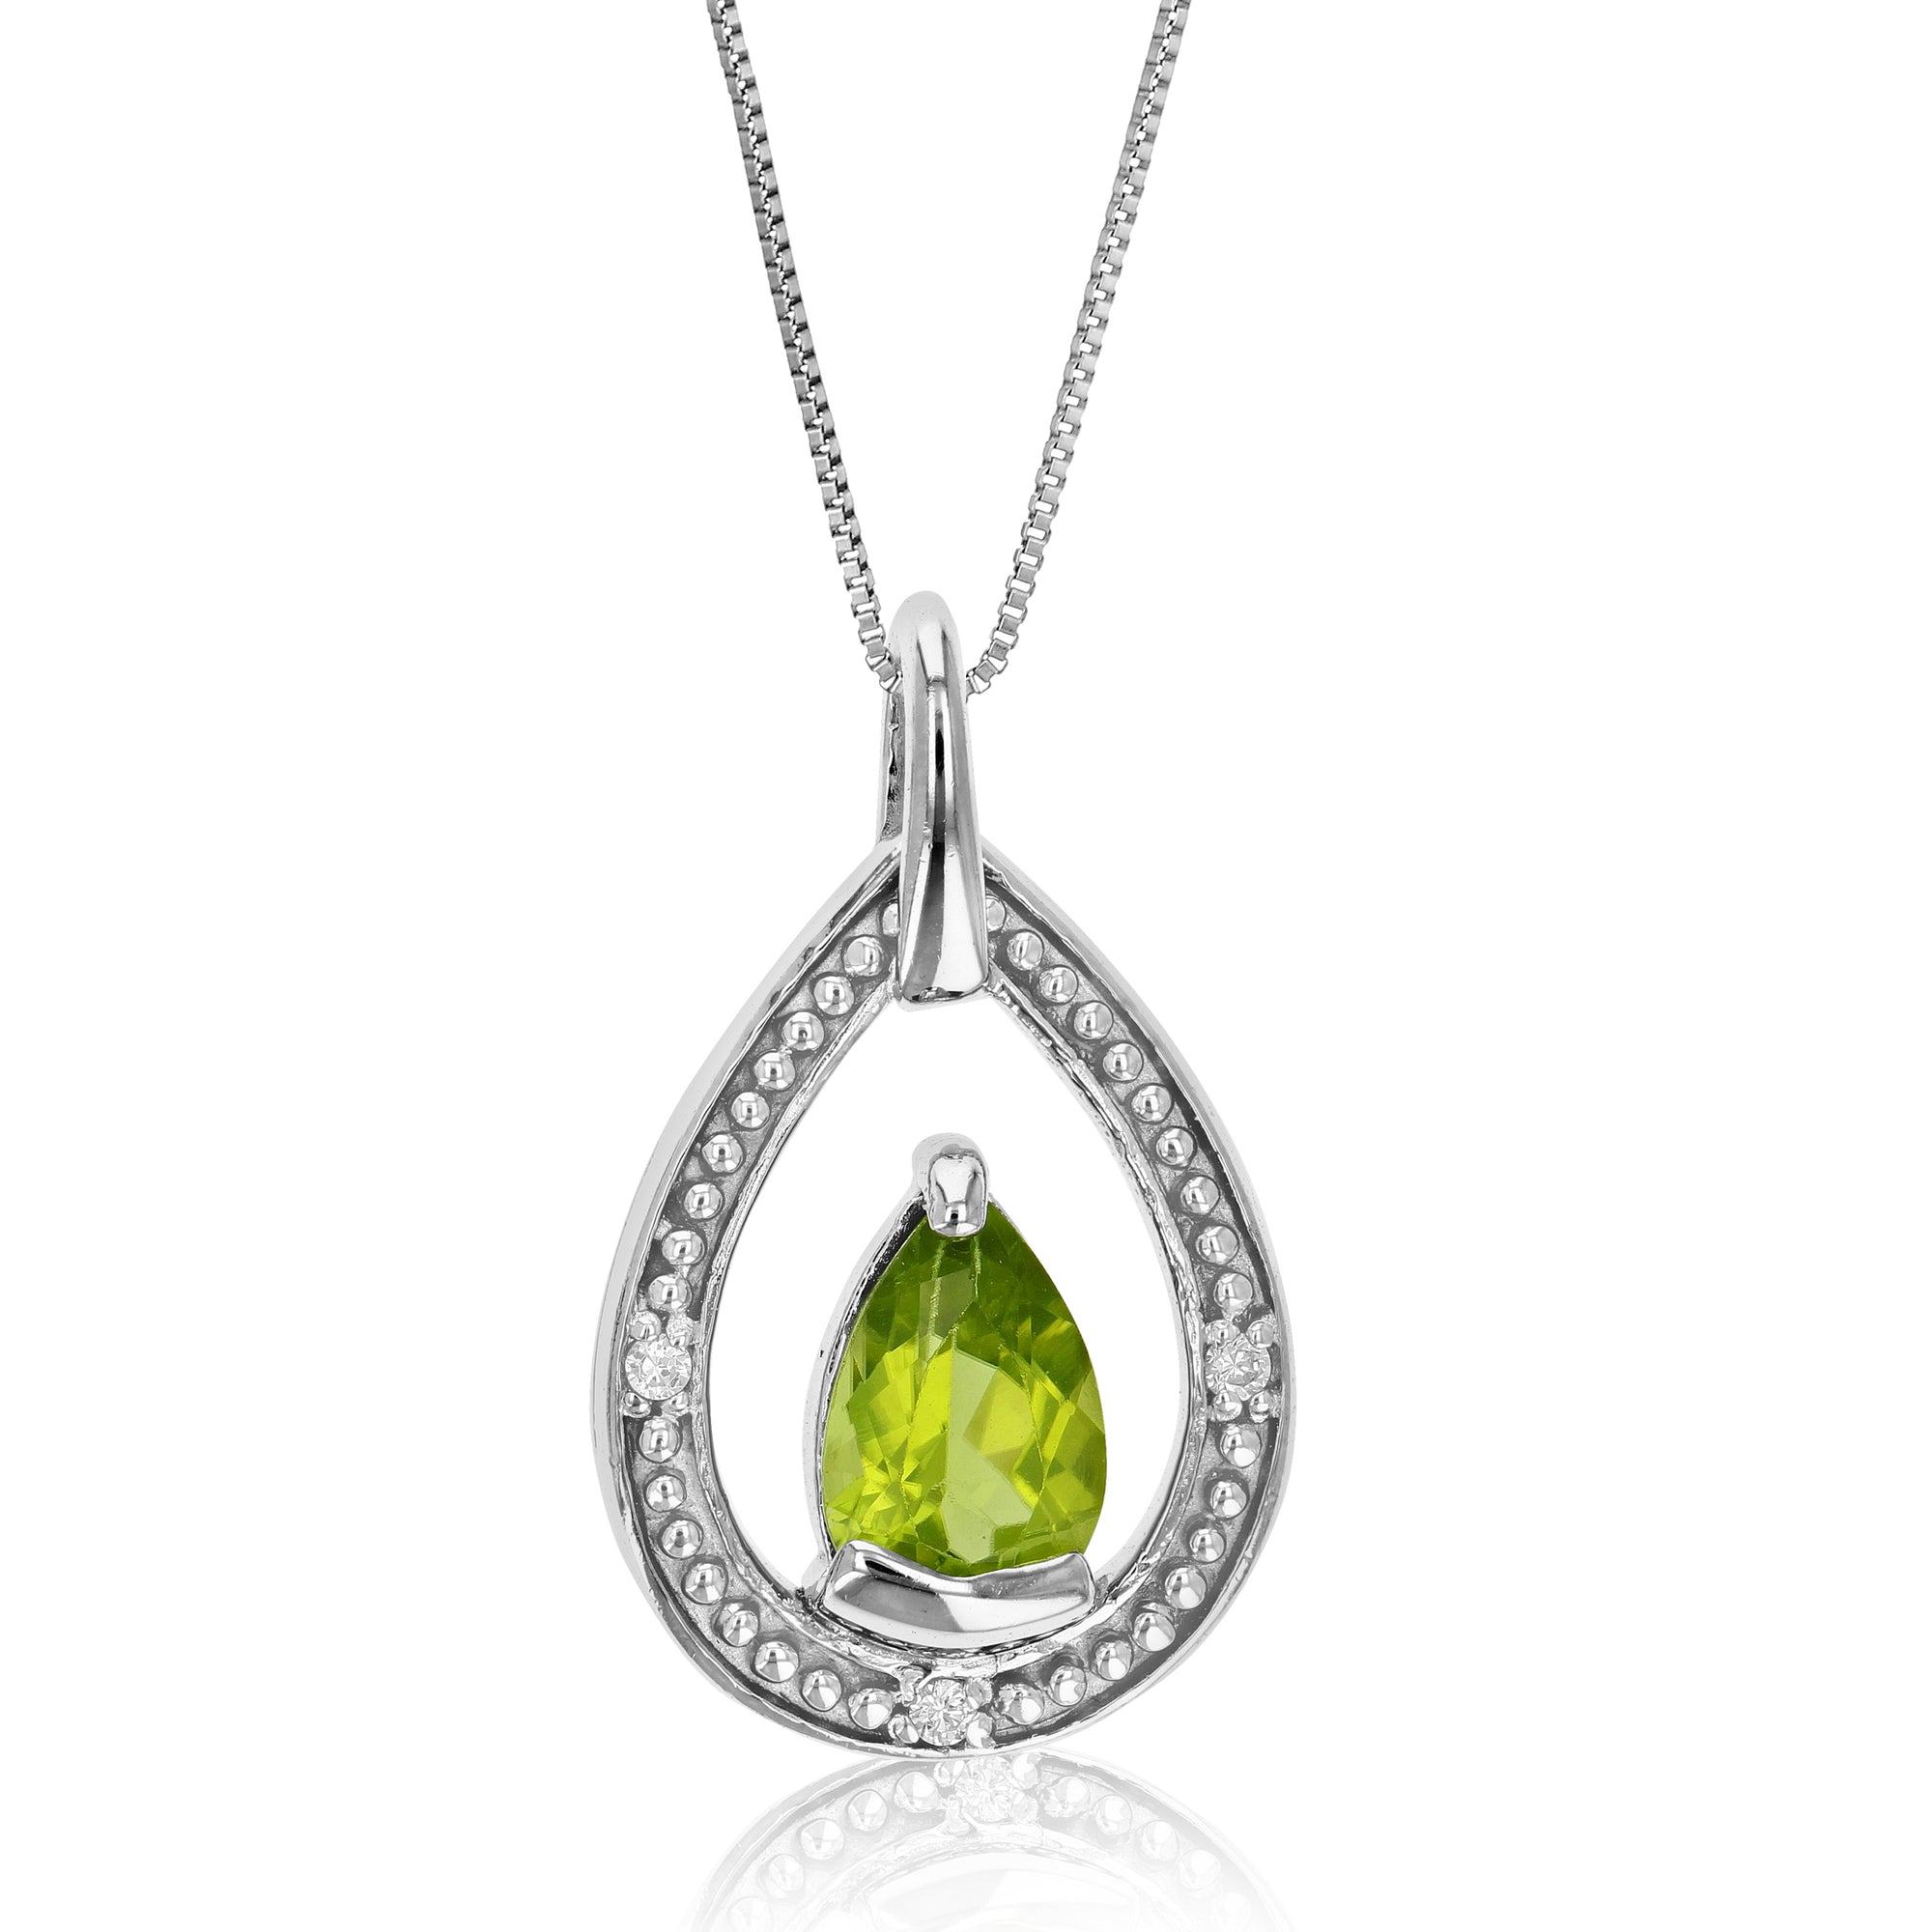 0.67 cttw Pendant Necklace, Peridot and Diamond Pear Shape Pendant Necklace for Women in .925 Sterling Silver with Rhodium, 18 Inch Chain, Prong Setting